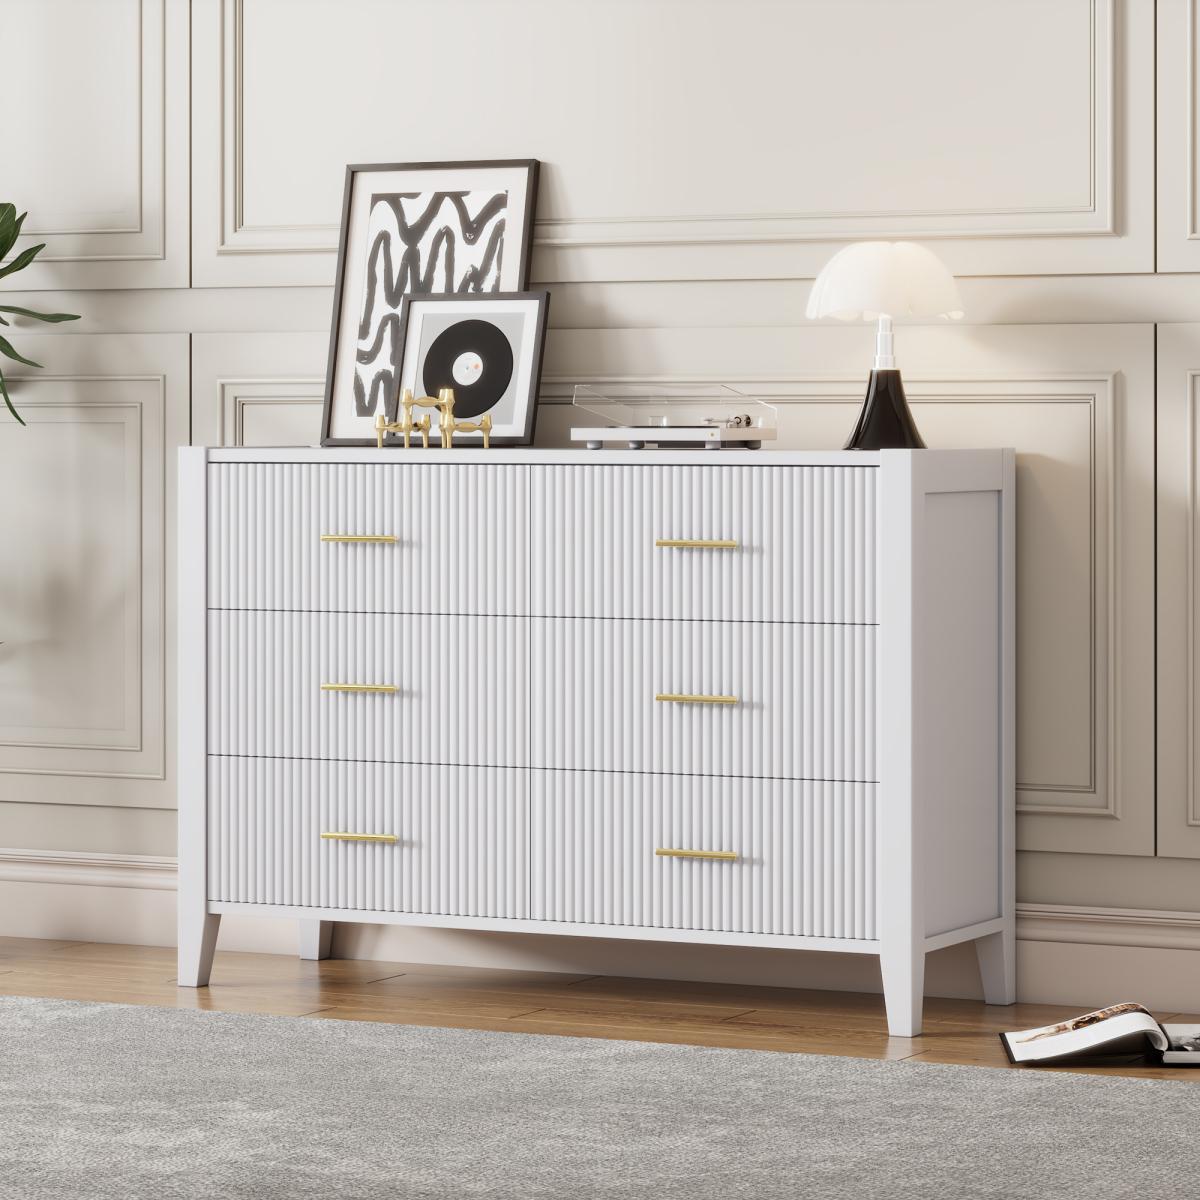 6 Drawer Dresser with Metal Handle for Bedroom, Storage Cabinet with Vertical Stripe Finish Drawer, White(Passed Astm F2057-23 Test)